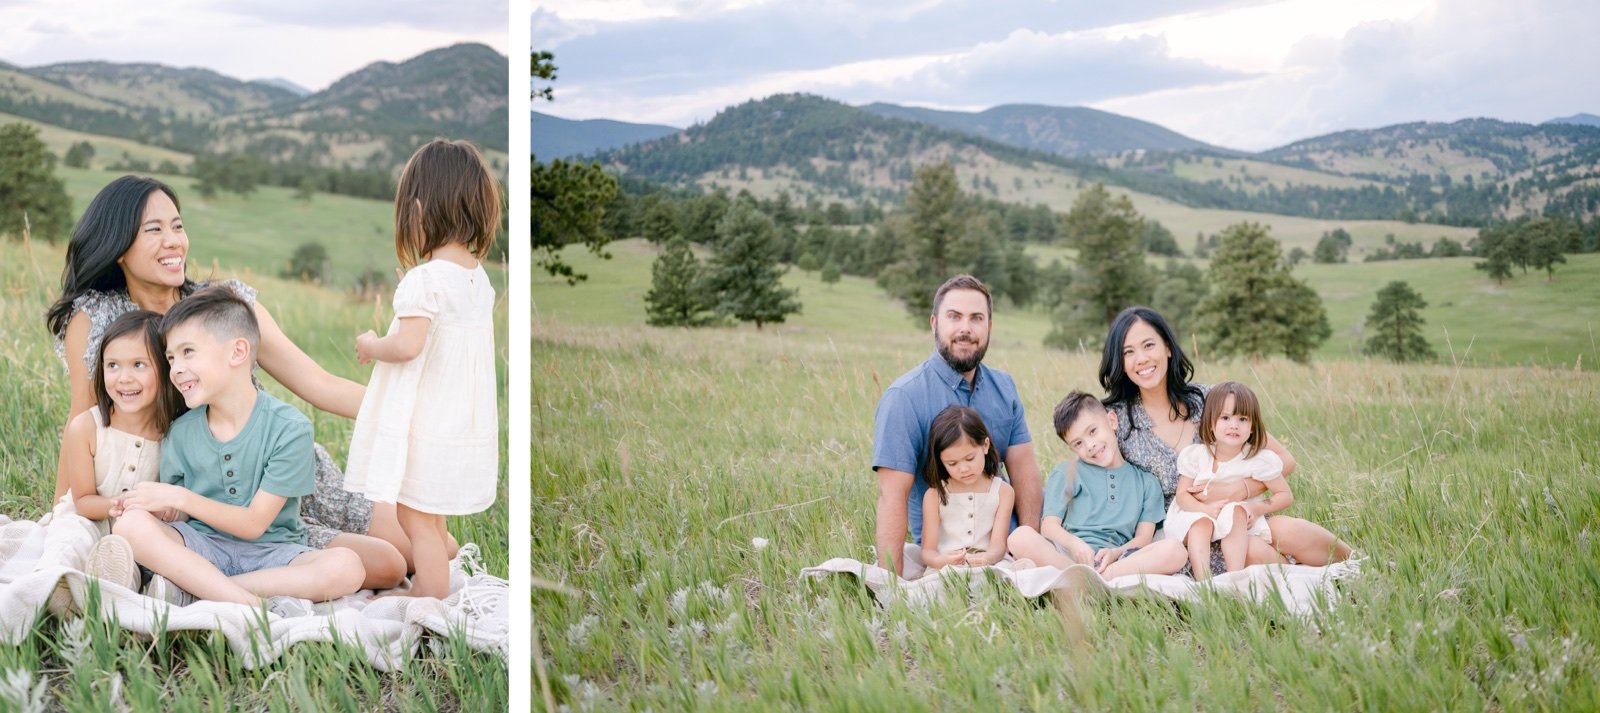 Golden Colorado family playing in a lush green mountain meadow at sunset